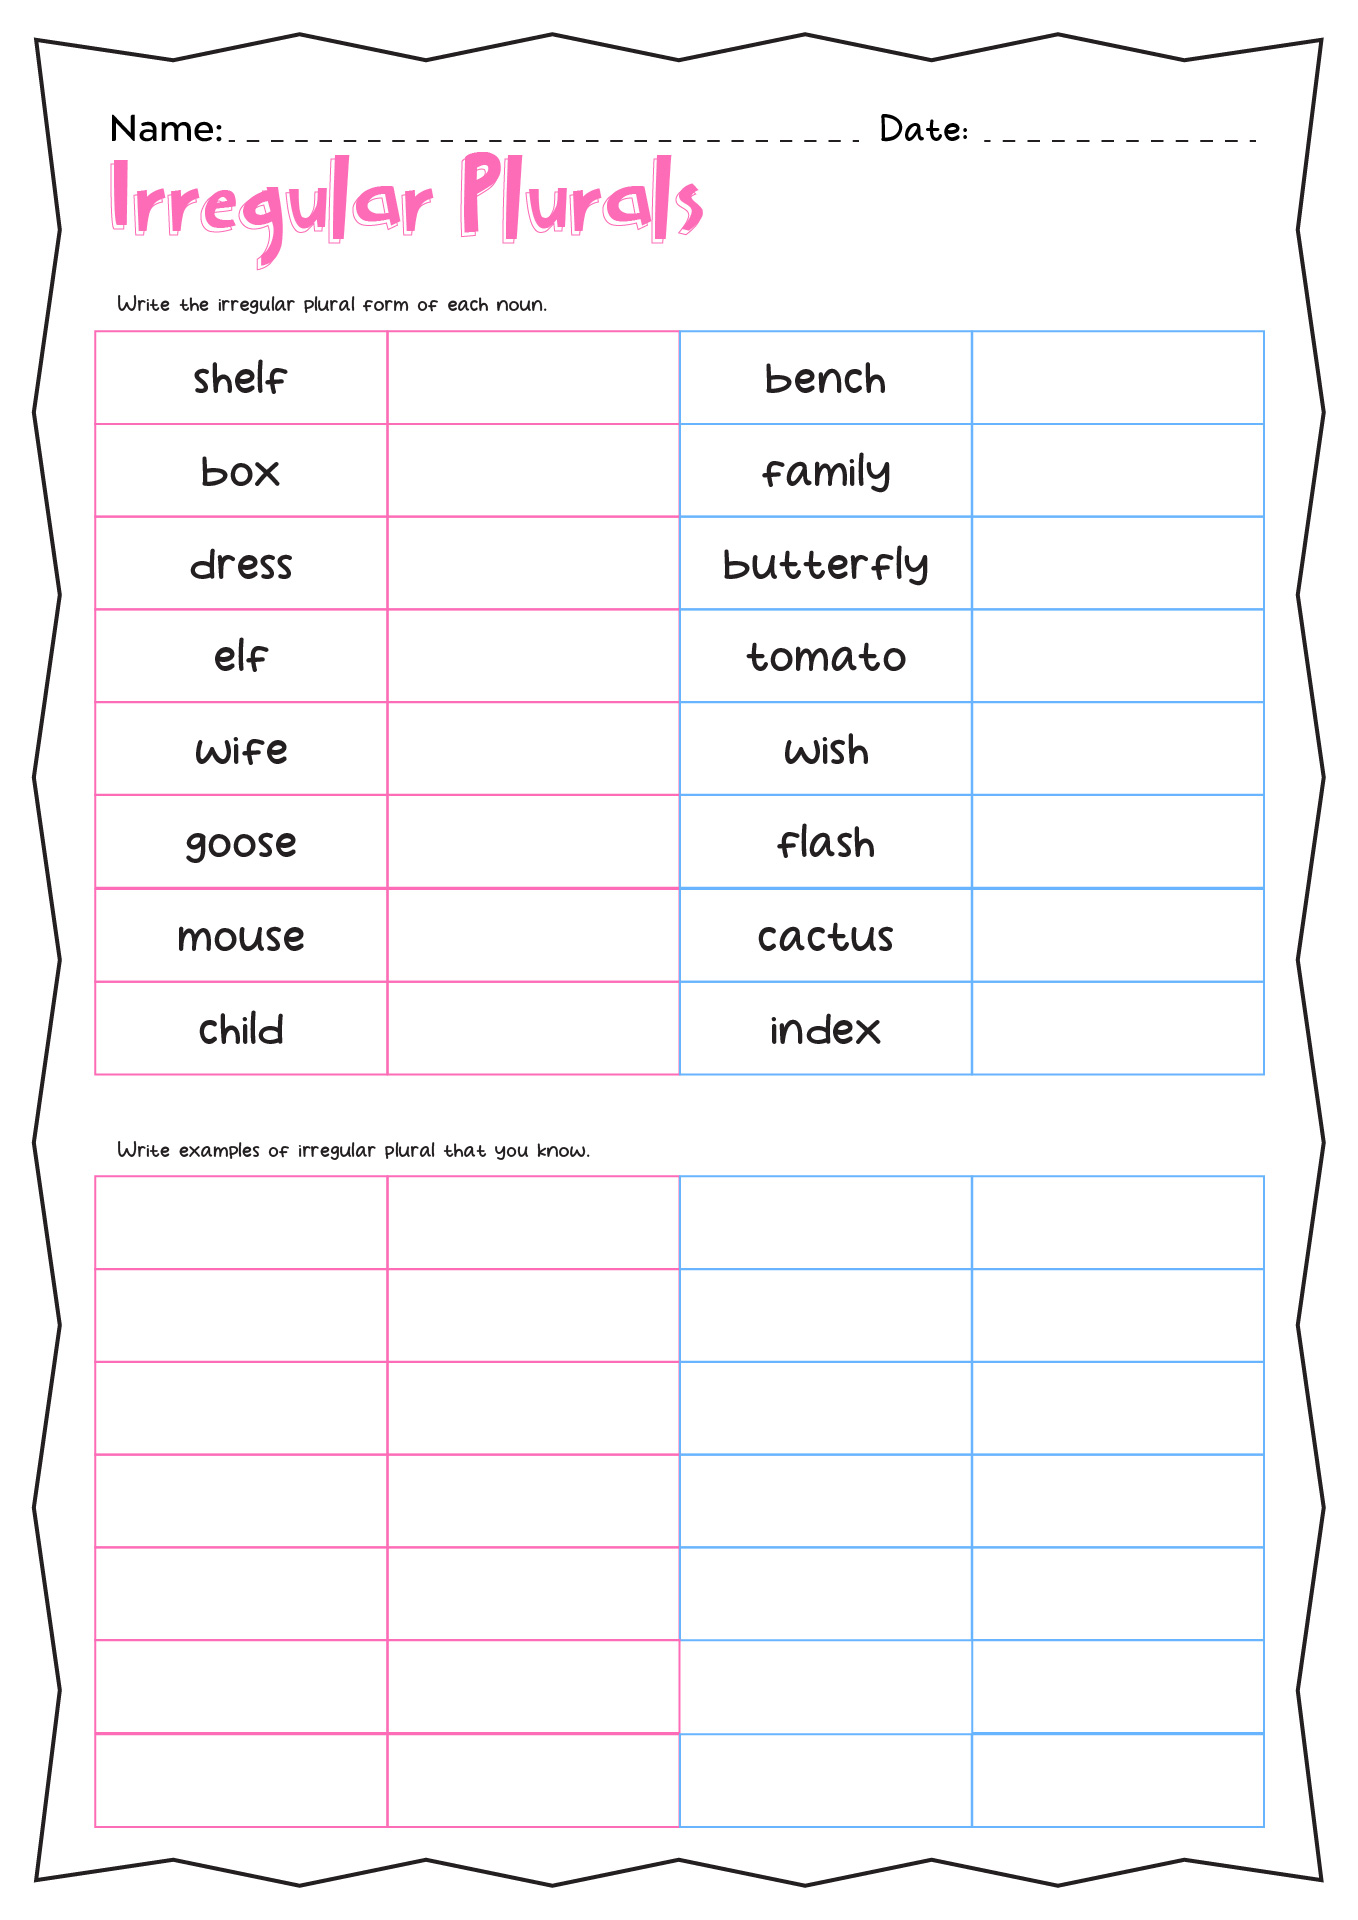 printable-plural-nouns-worksheets-for-kids-tree-valley-academy